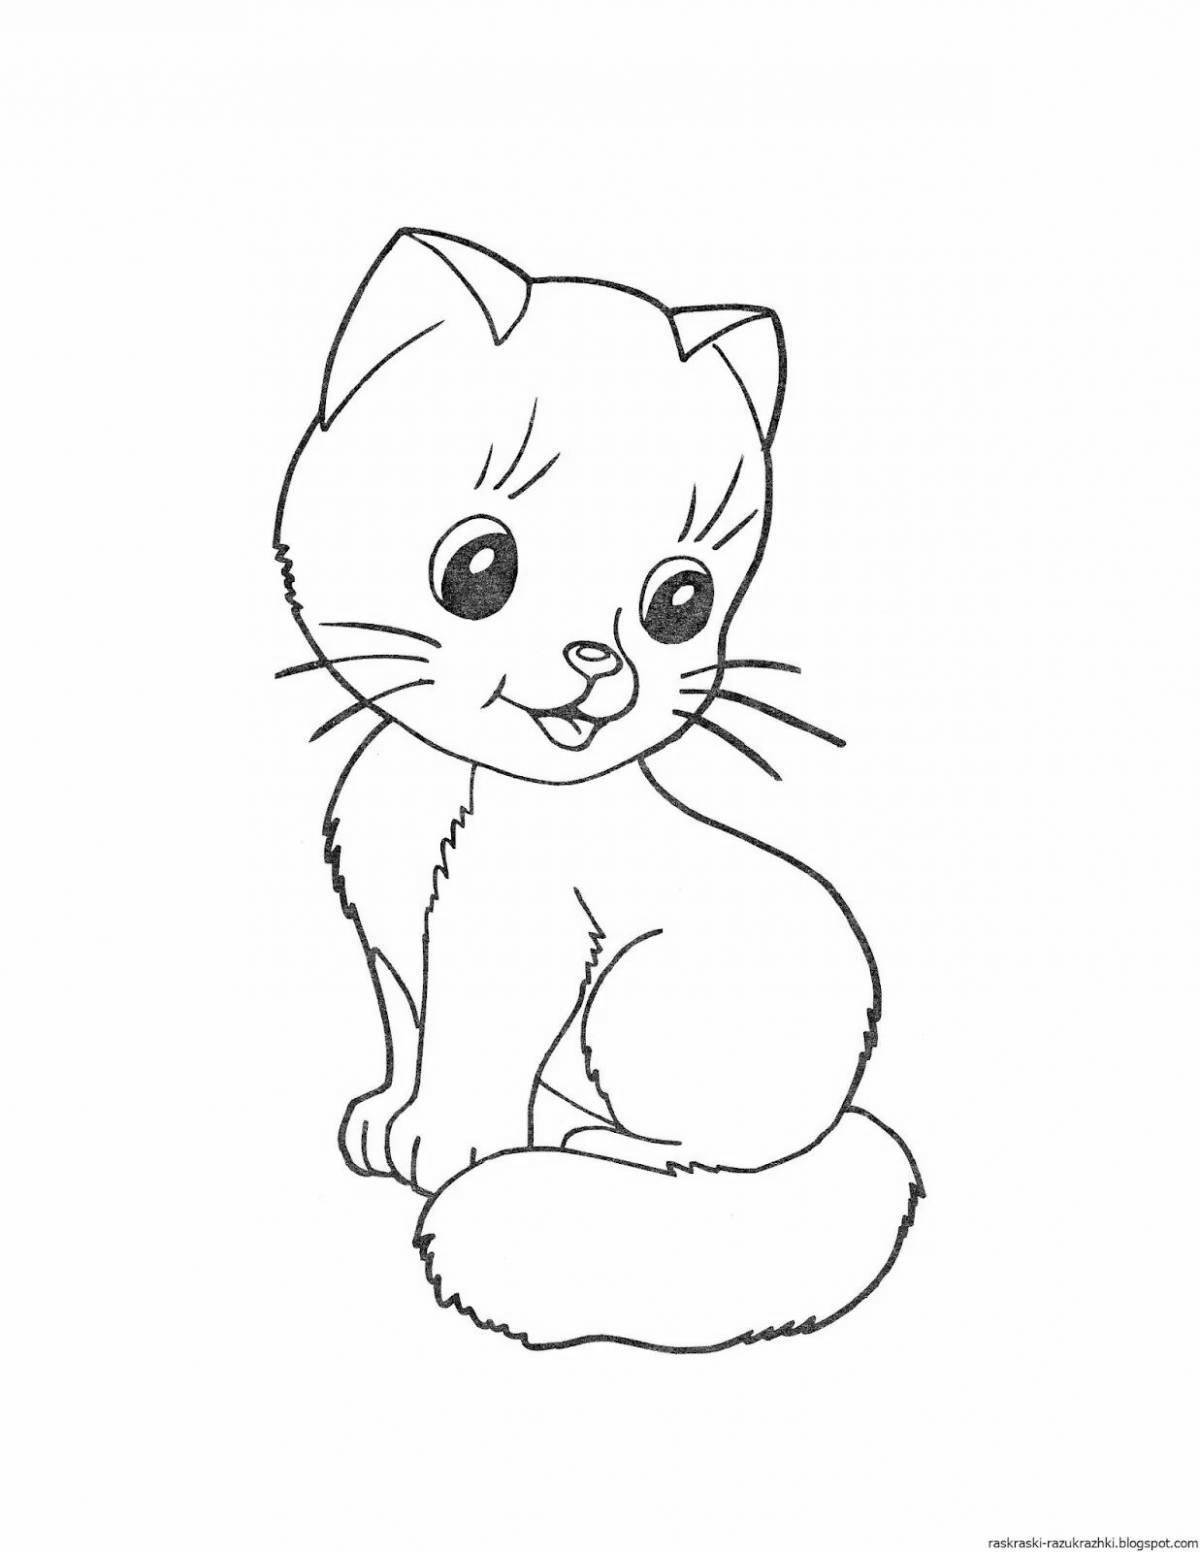 Funny kitten coloring book for kids 3-4 years old